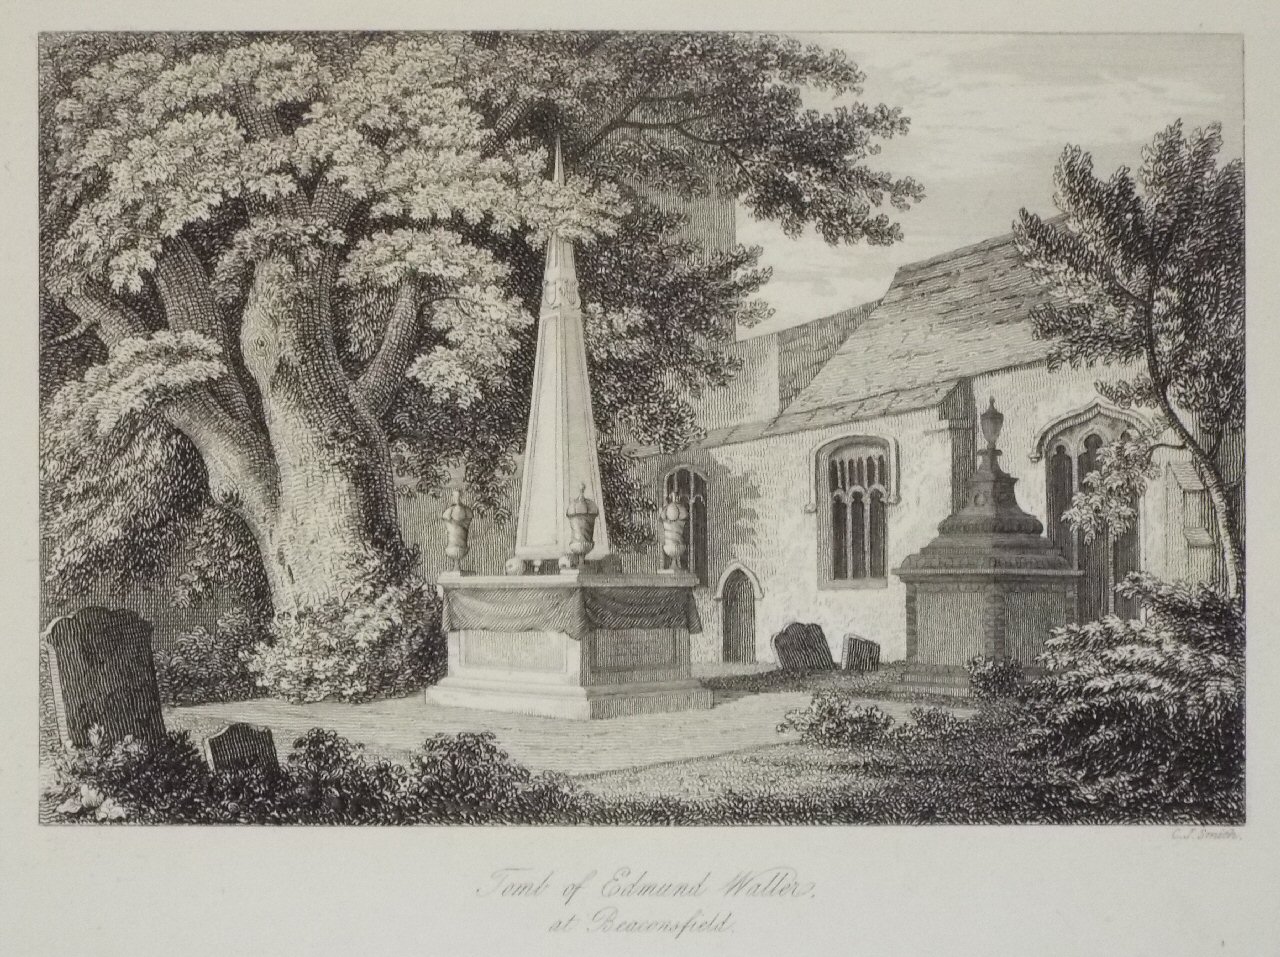 Print - Tomb of Edmund Waller, at Beaconsfield. - Smith